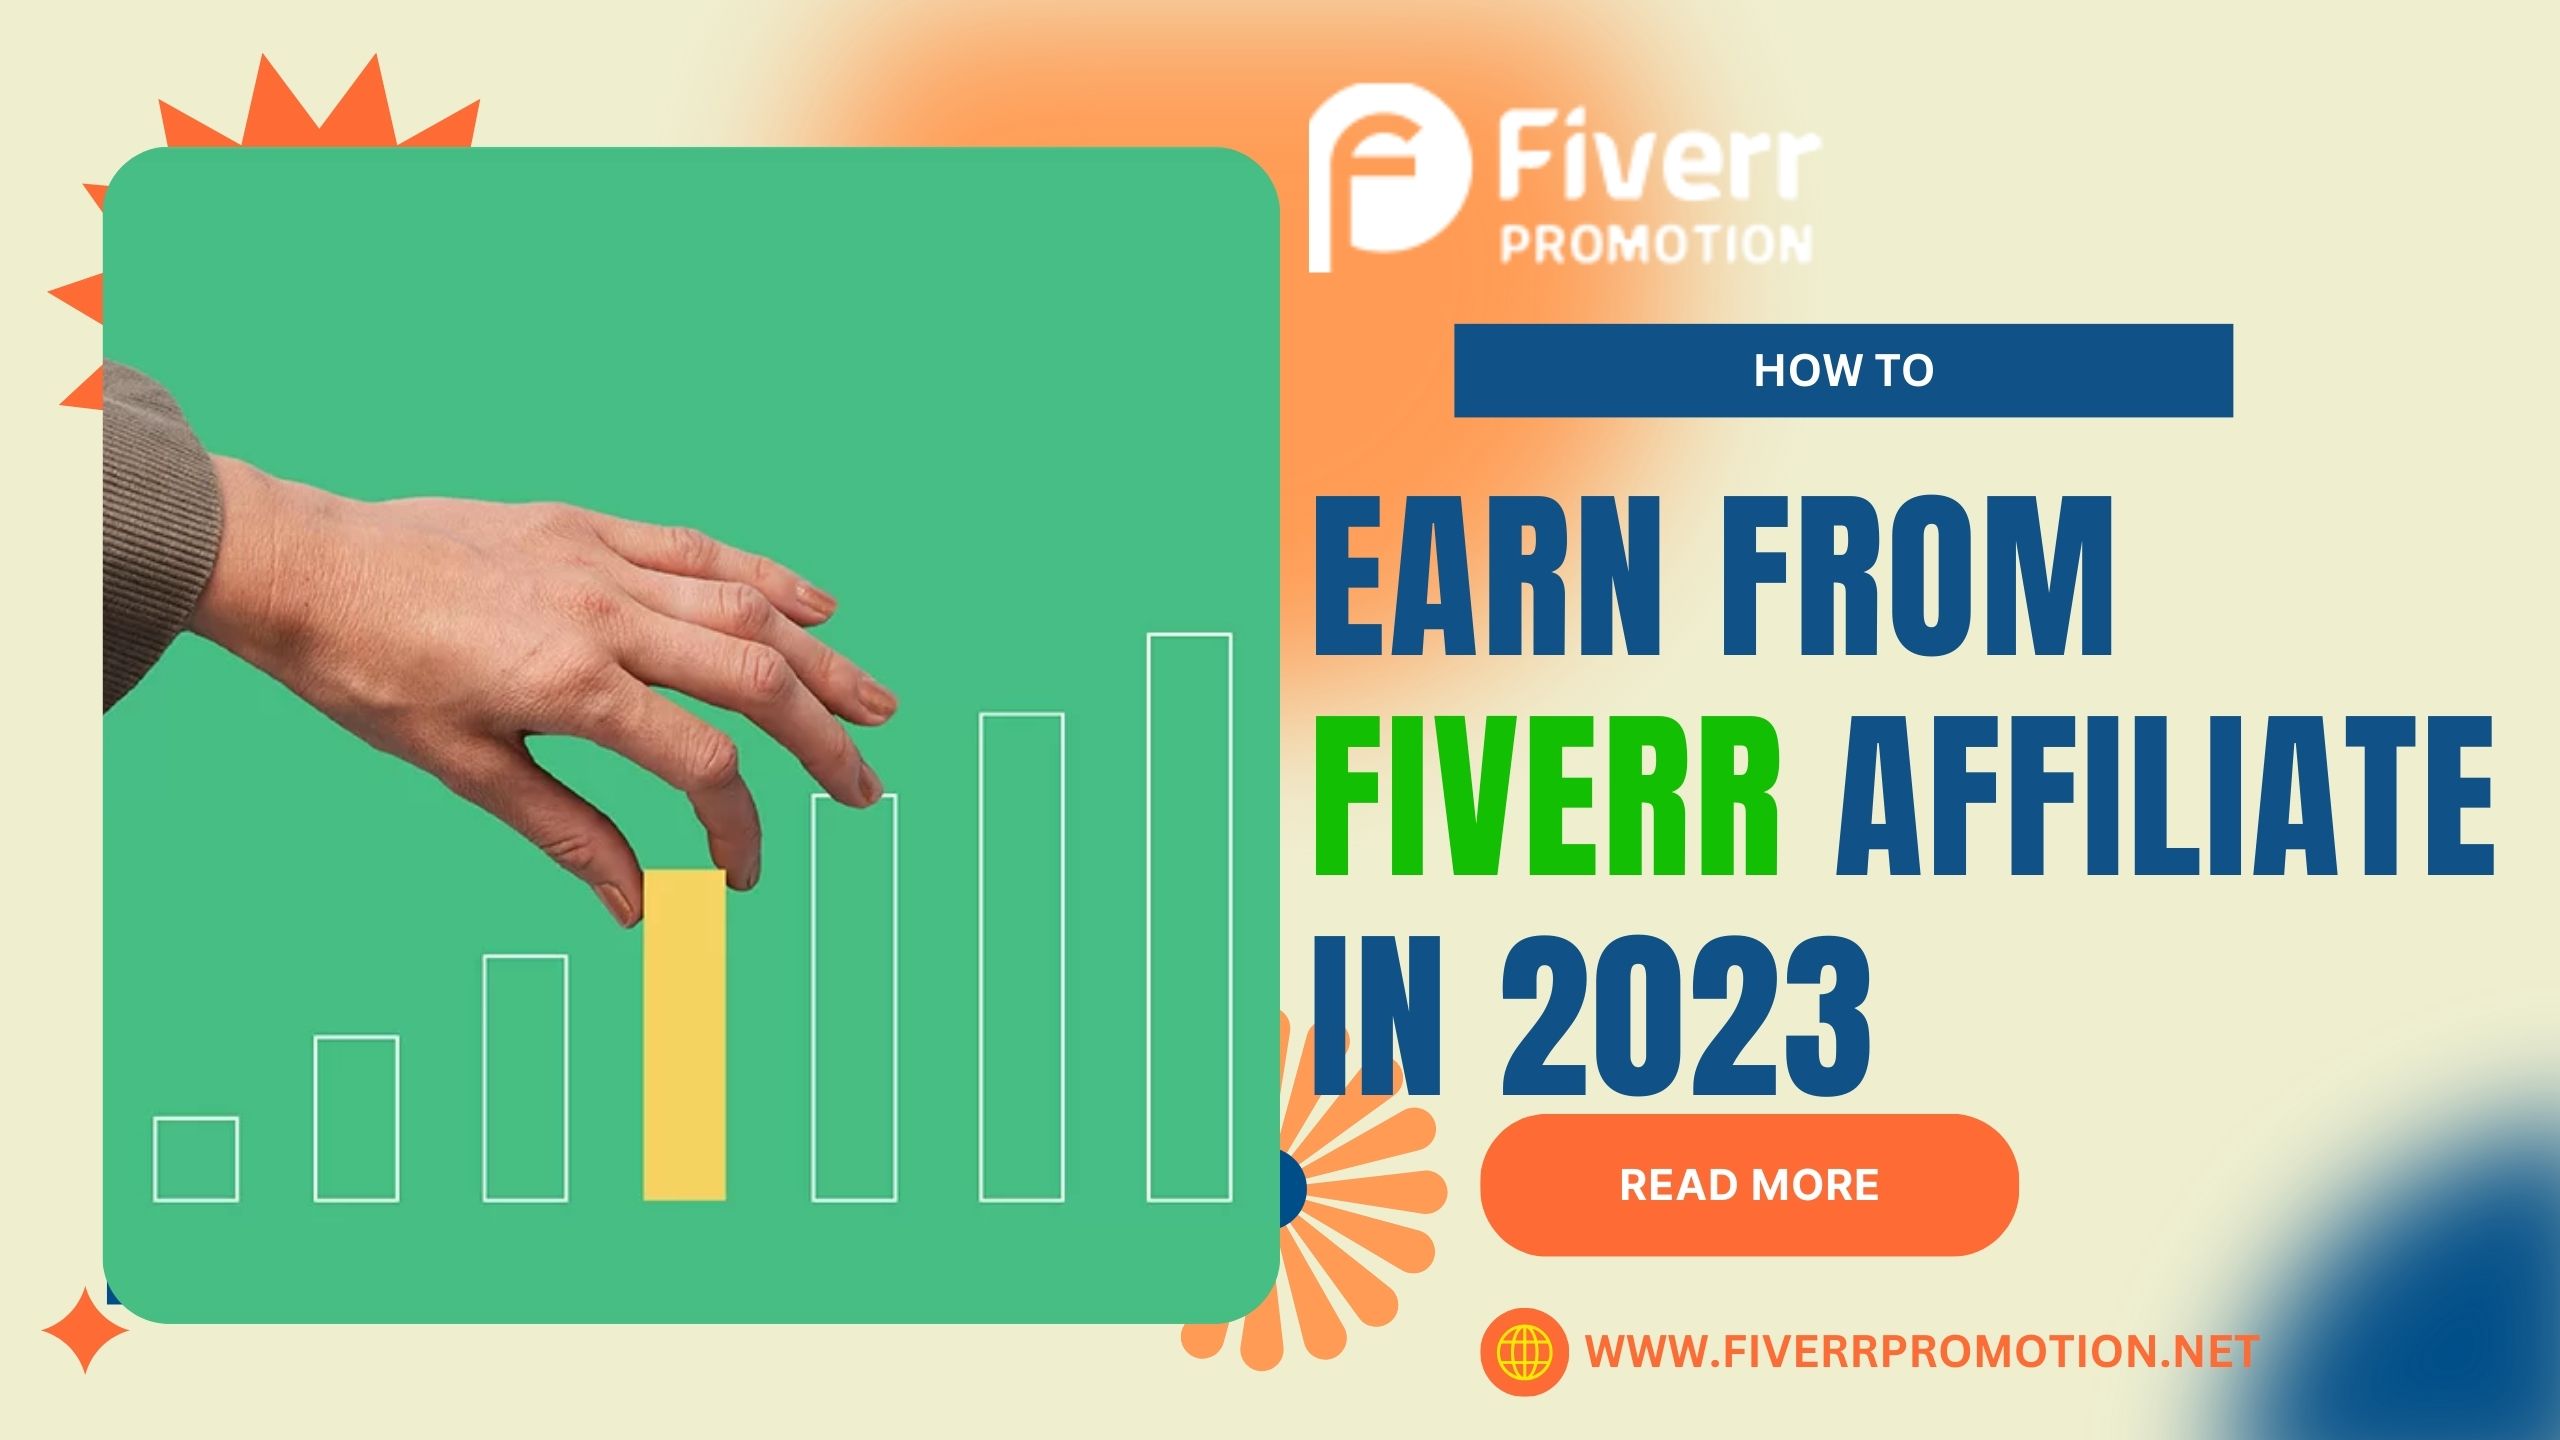 How to Earn from Fiverr Affiliate in 2023